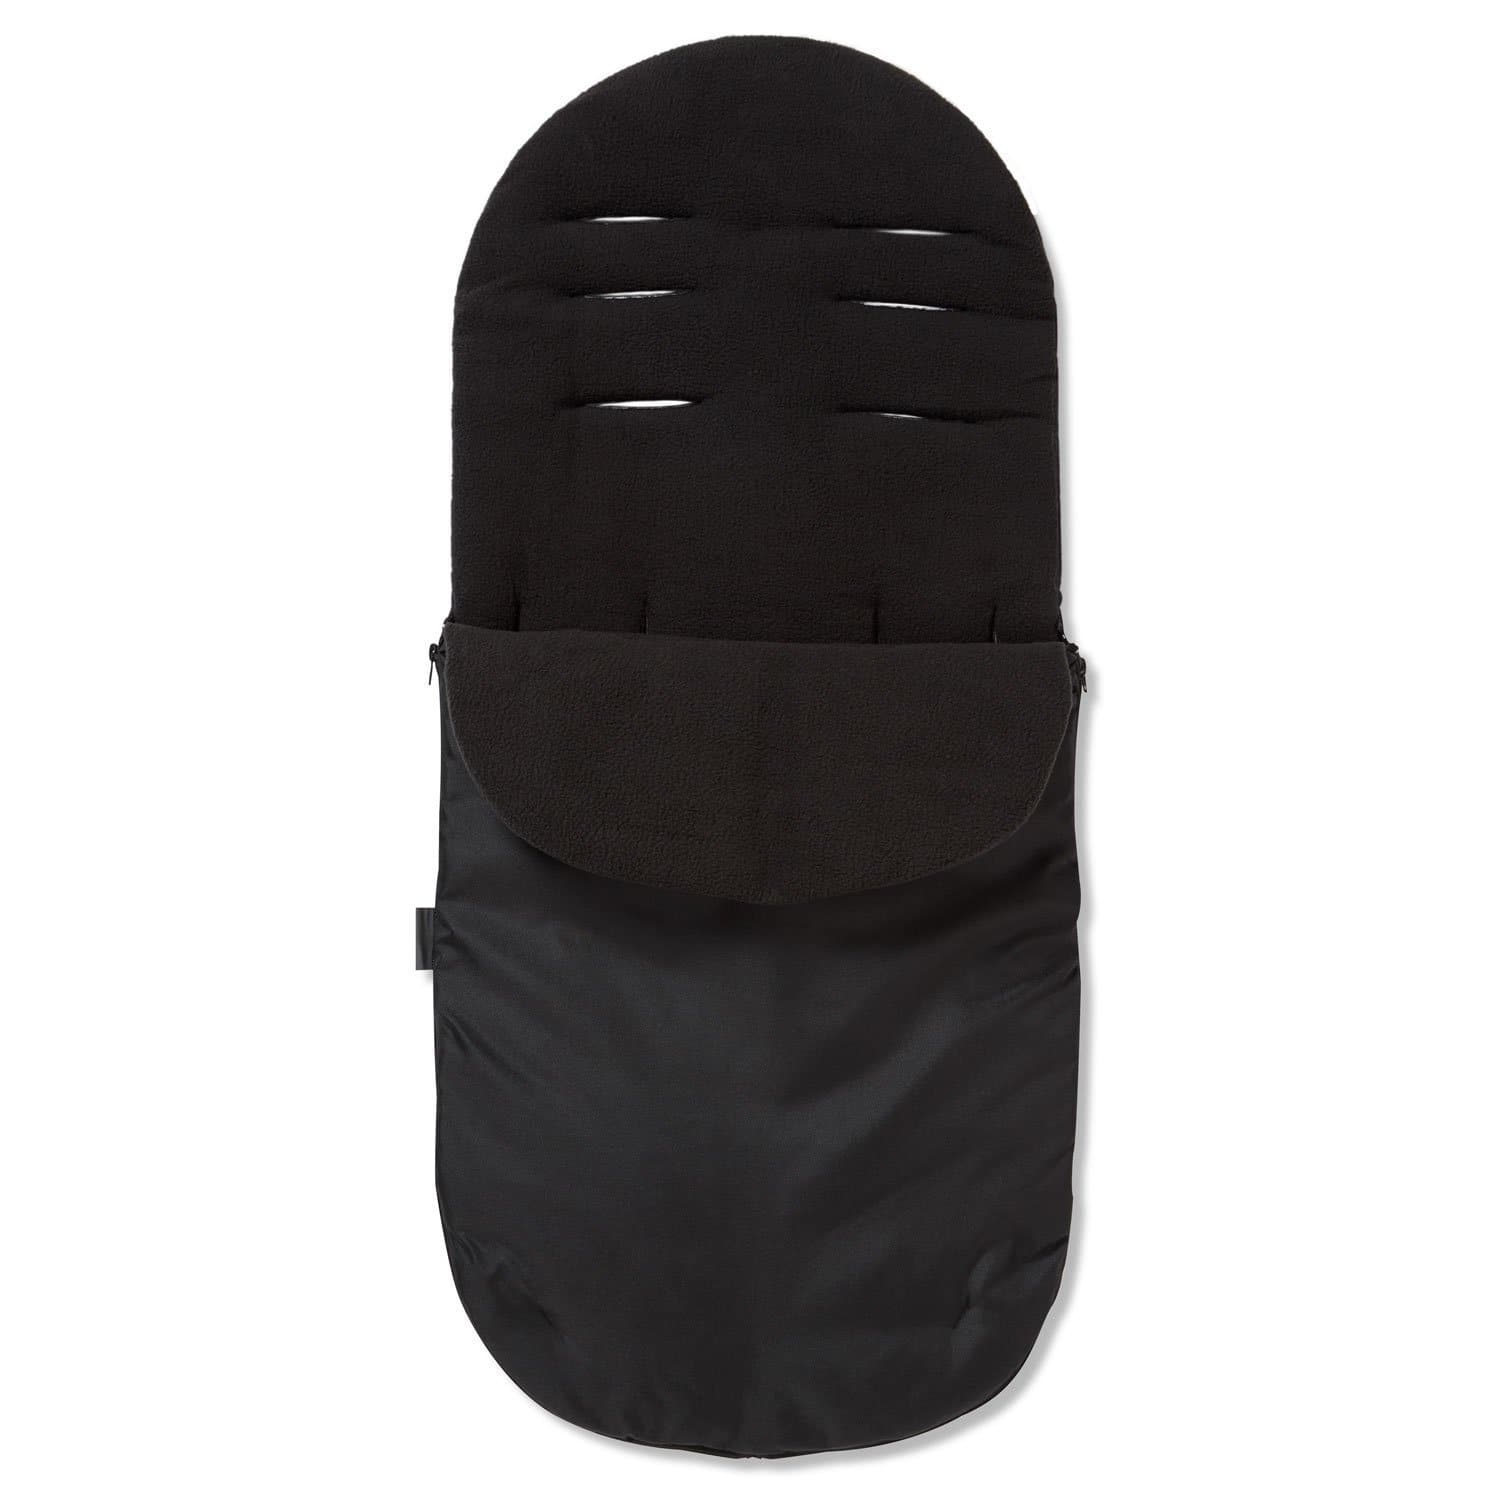 Footmuff / Cosy Toes Compatible with Graco - Black / Fits All Models | For Your Little One